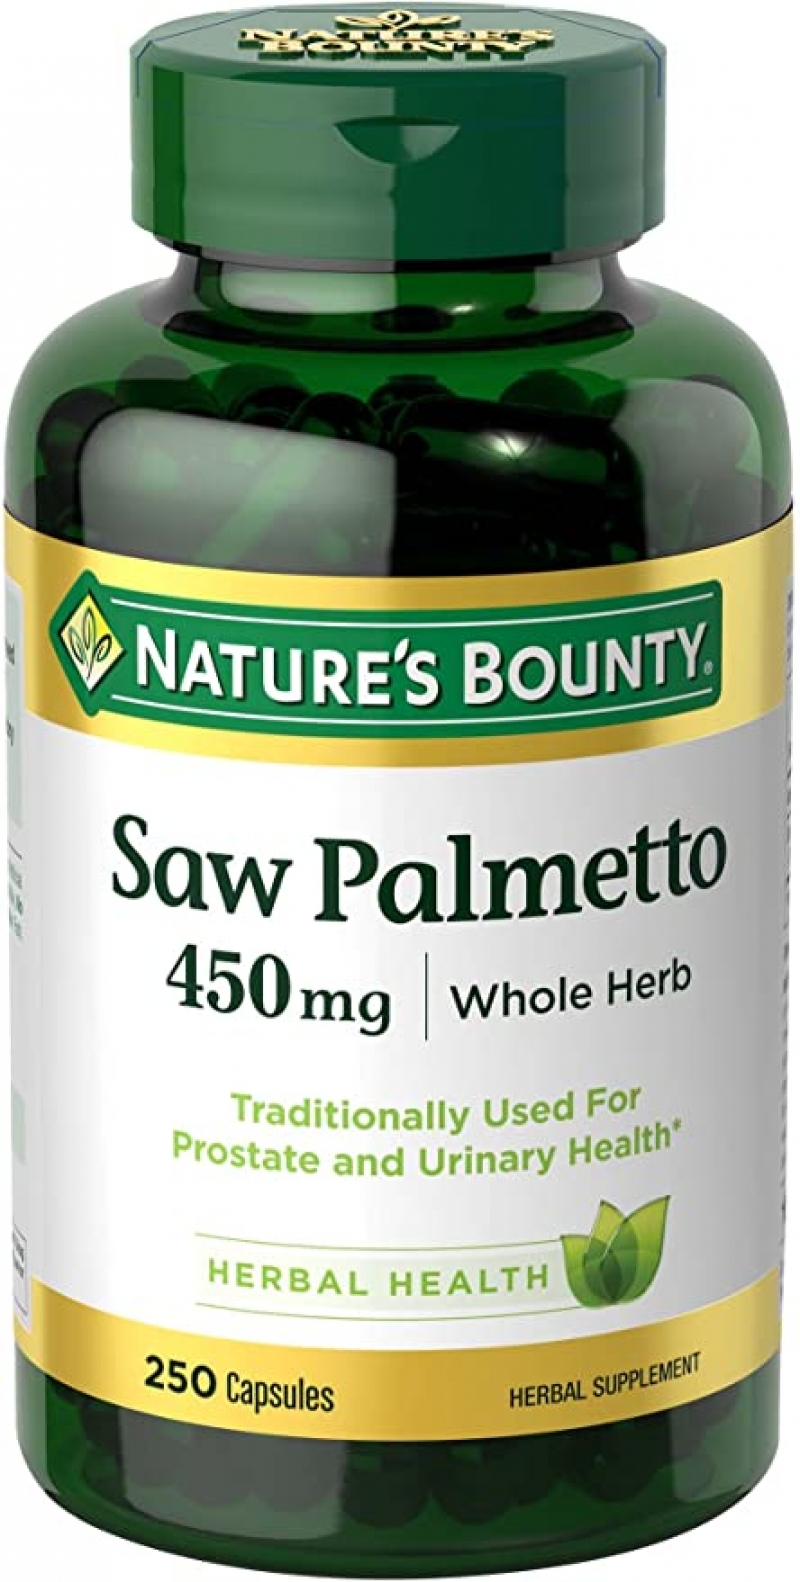 ihocon: Nature's Bounty Saw Palmetto Support for Prostate and Urinary Health, Herbal Health Supplement鋸棕櫚450mg, 250粒